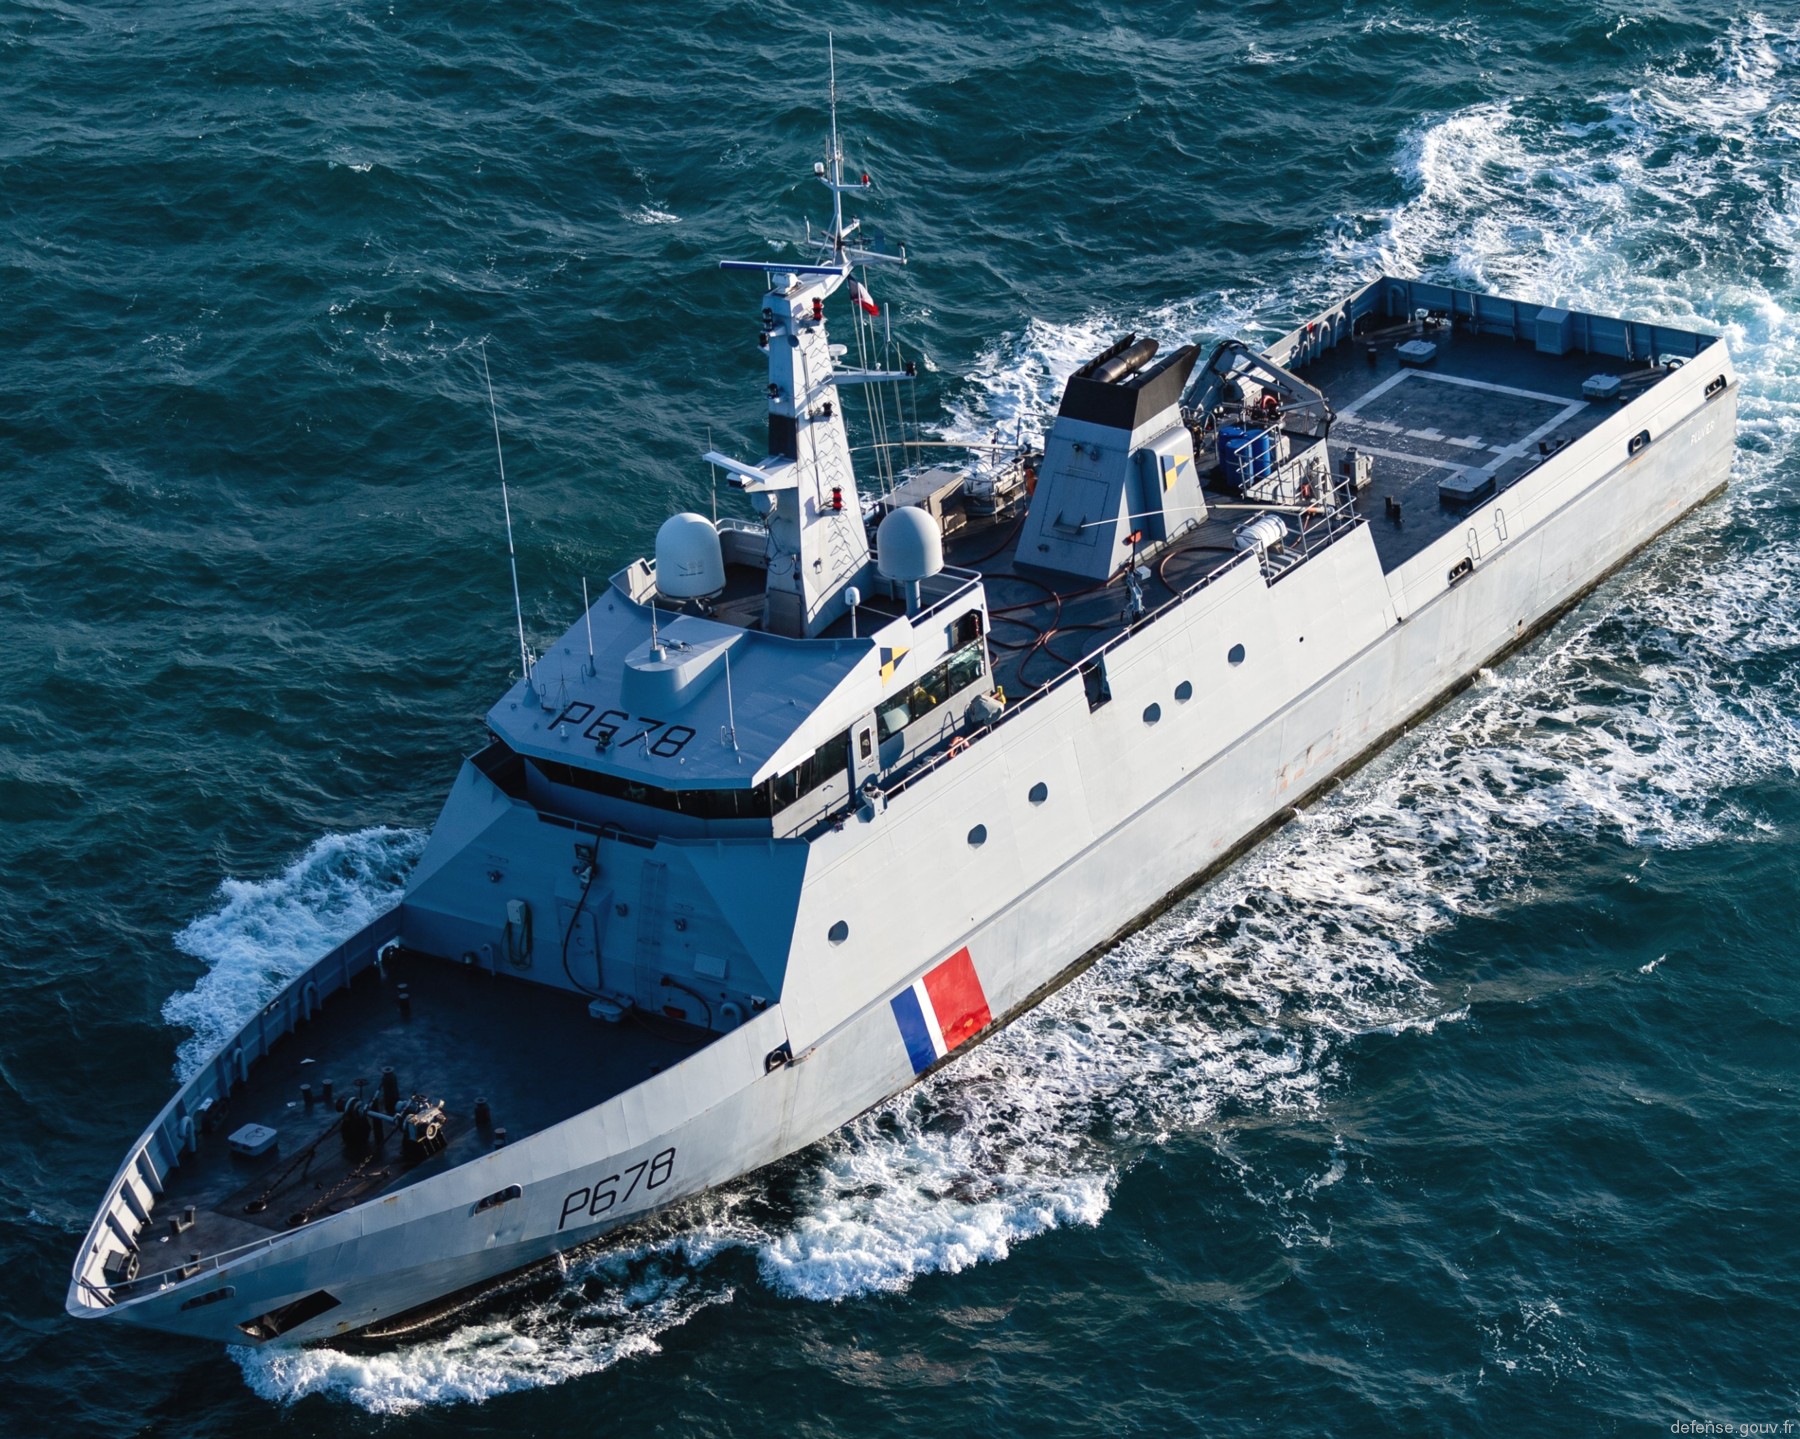 p-678 pluvier flamant class offshore patrol vessel opv french navy patrouilleur marine nationale 07